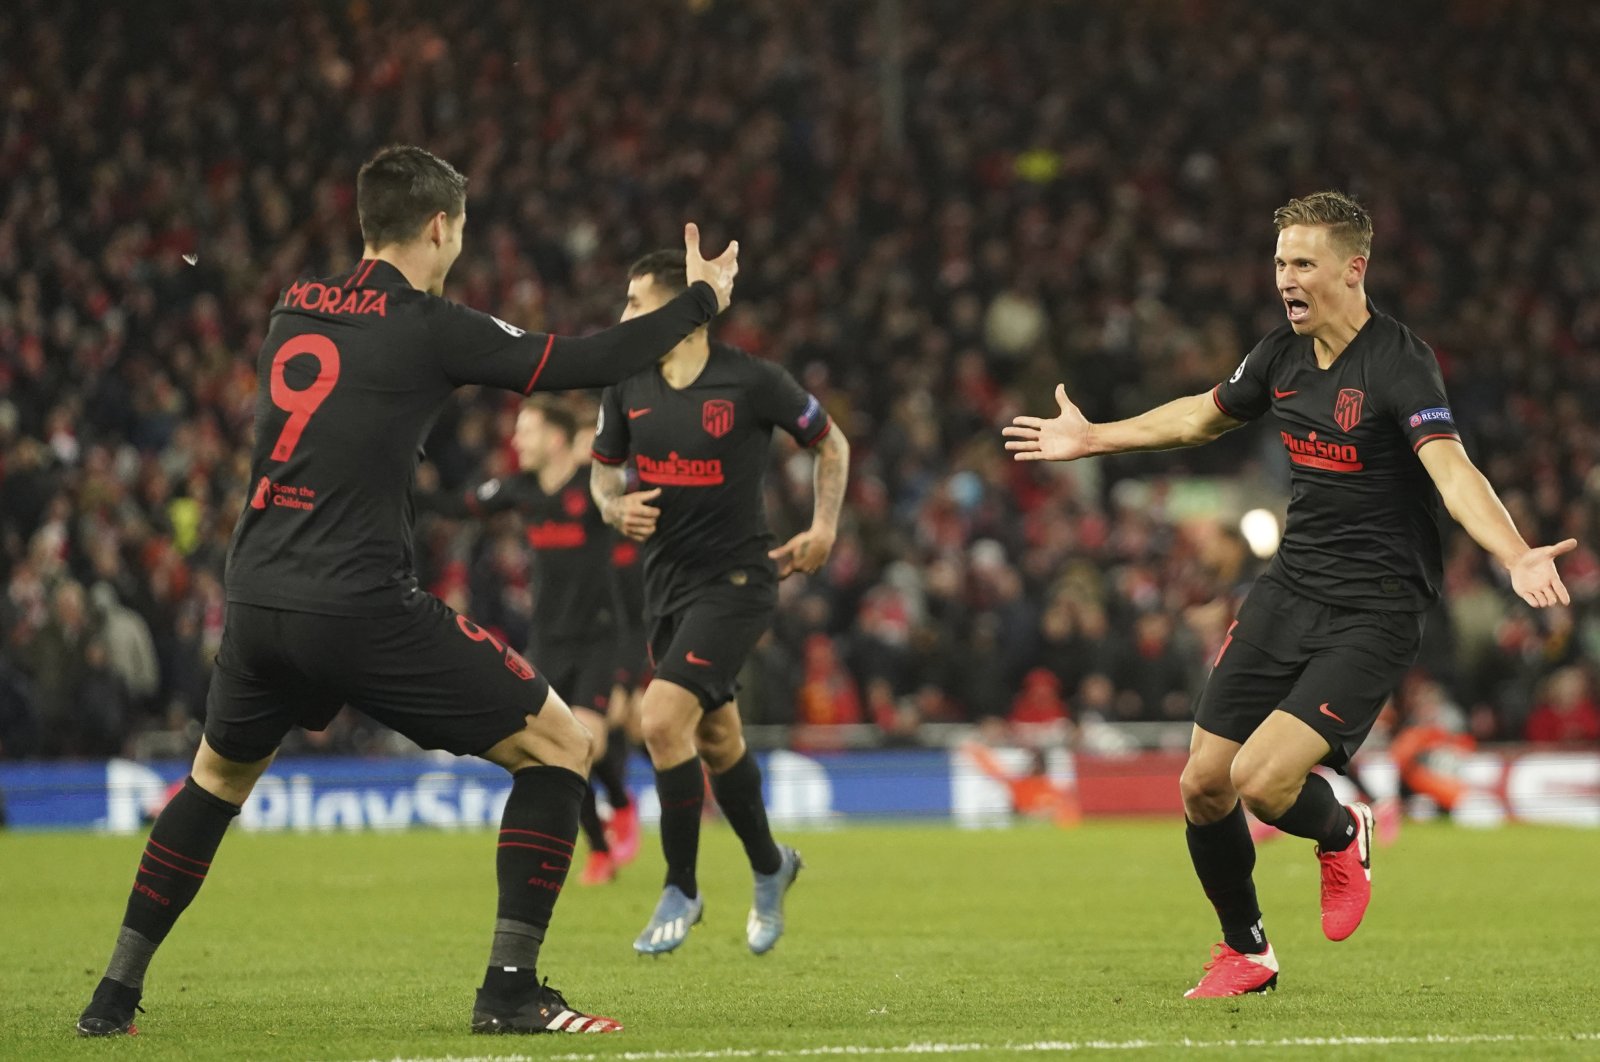 Atletico Madrid's Marcos Llorente, right, celebrates after scoring his side's second goal during a second leg, round of 16, Champions League soccer match between Liverpool and Atletico Madrid at Anfield stadium in Liverpool, England, Wednesday, March 11, 2020. (AP Photo)